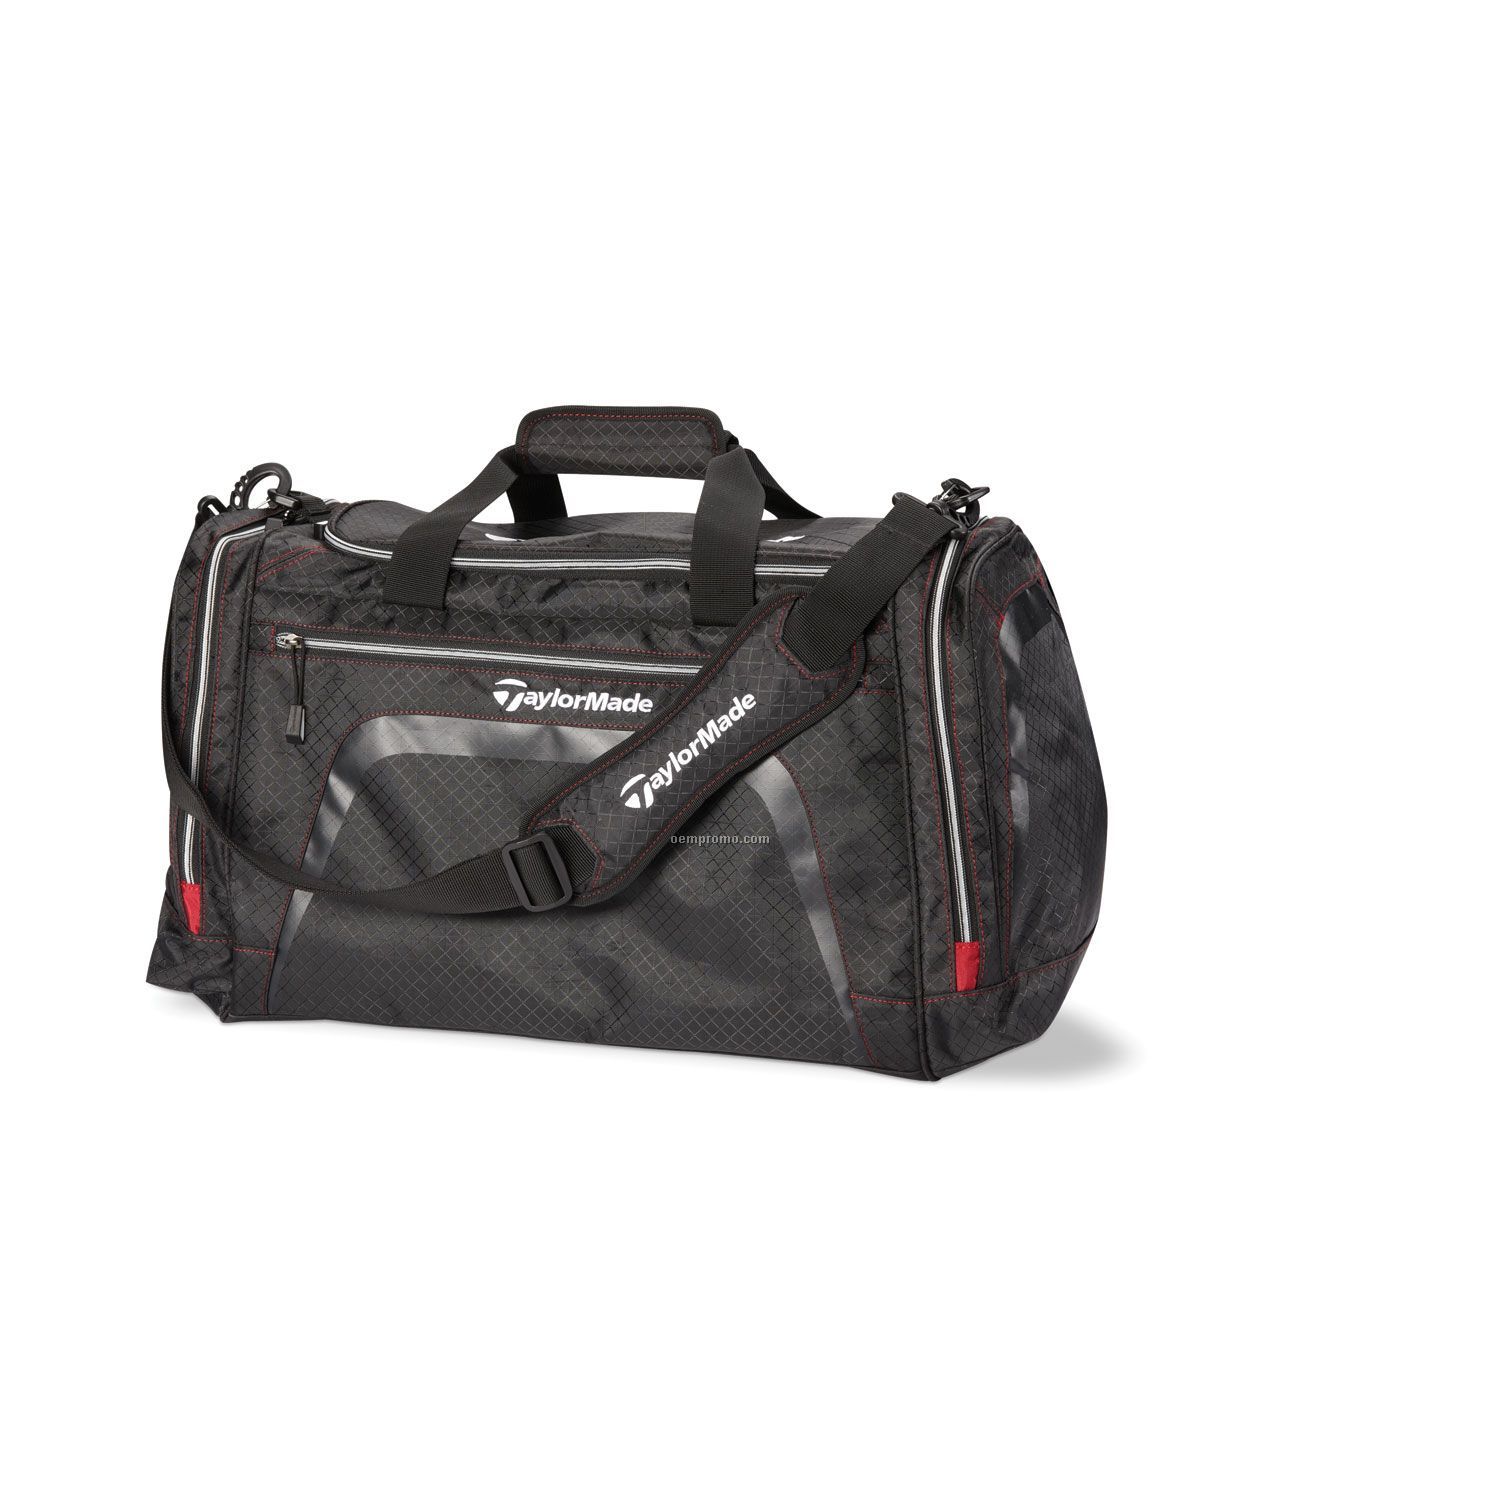 Taylormade Performance Medium Duffle Bag (2011) - Embroidered